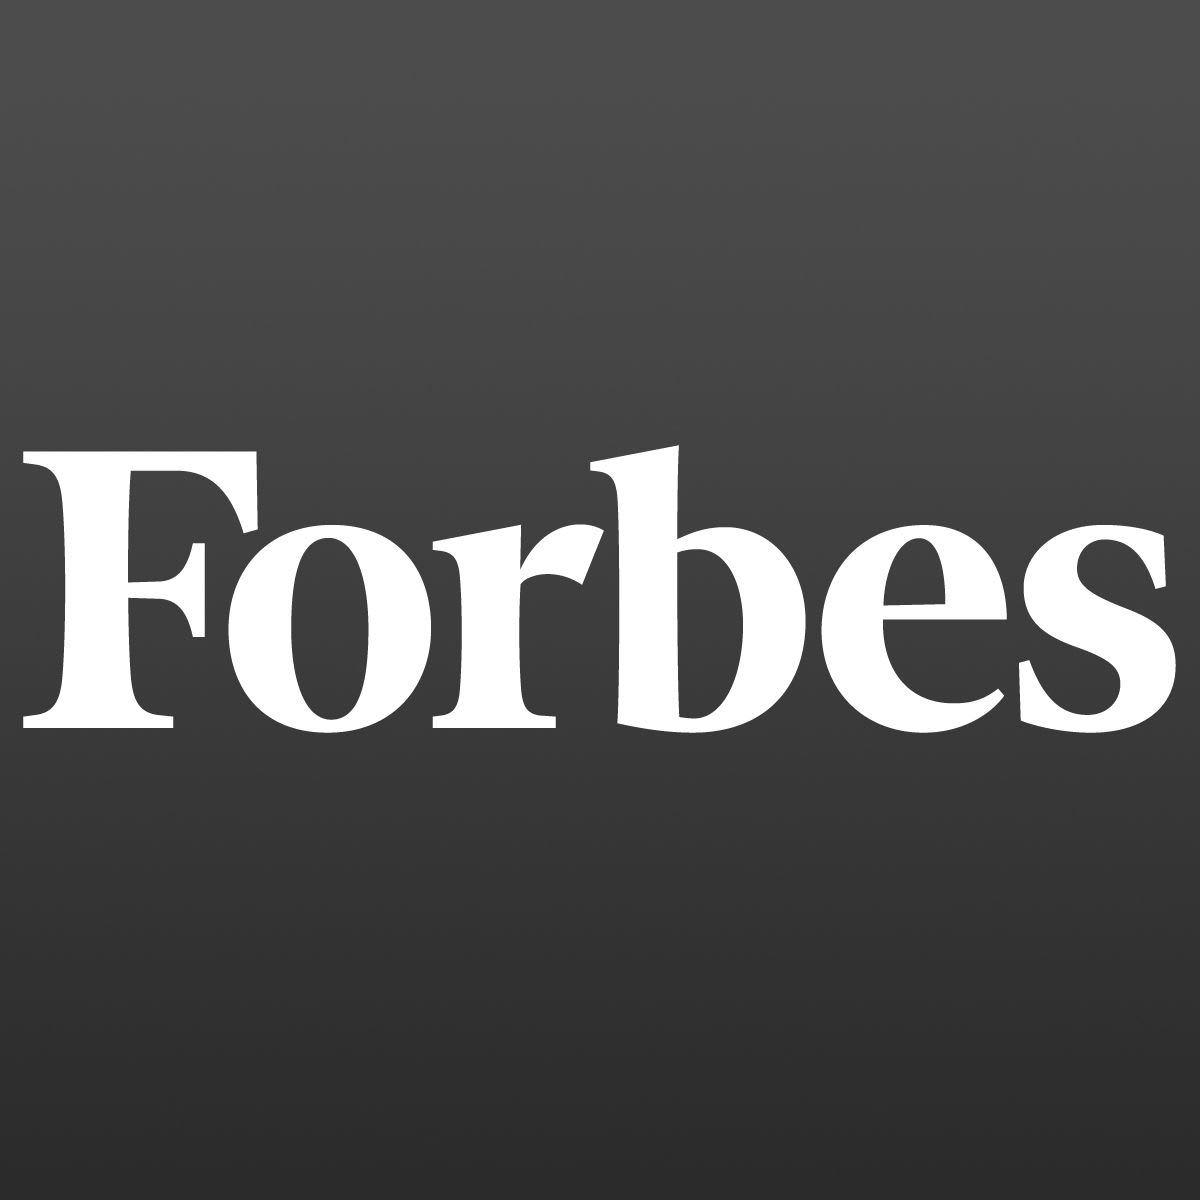 Write a forbes style article in 28 hours by Arienne_article  Fiverr